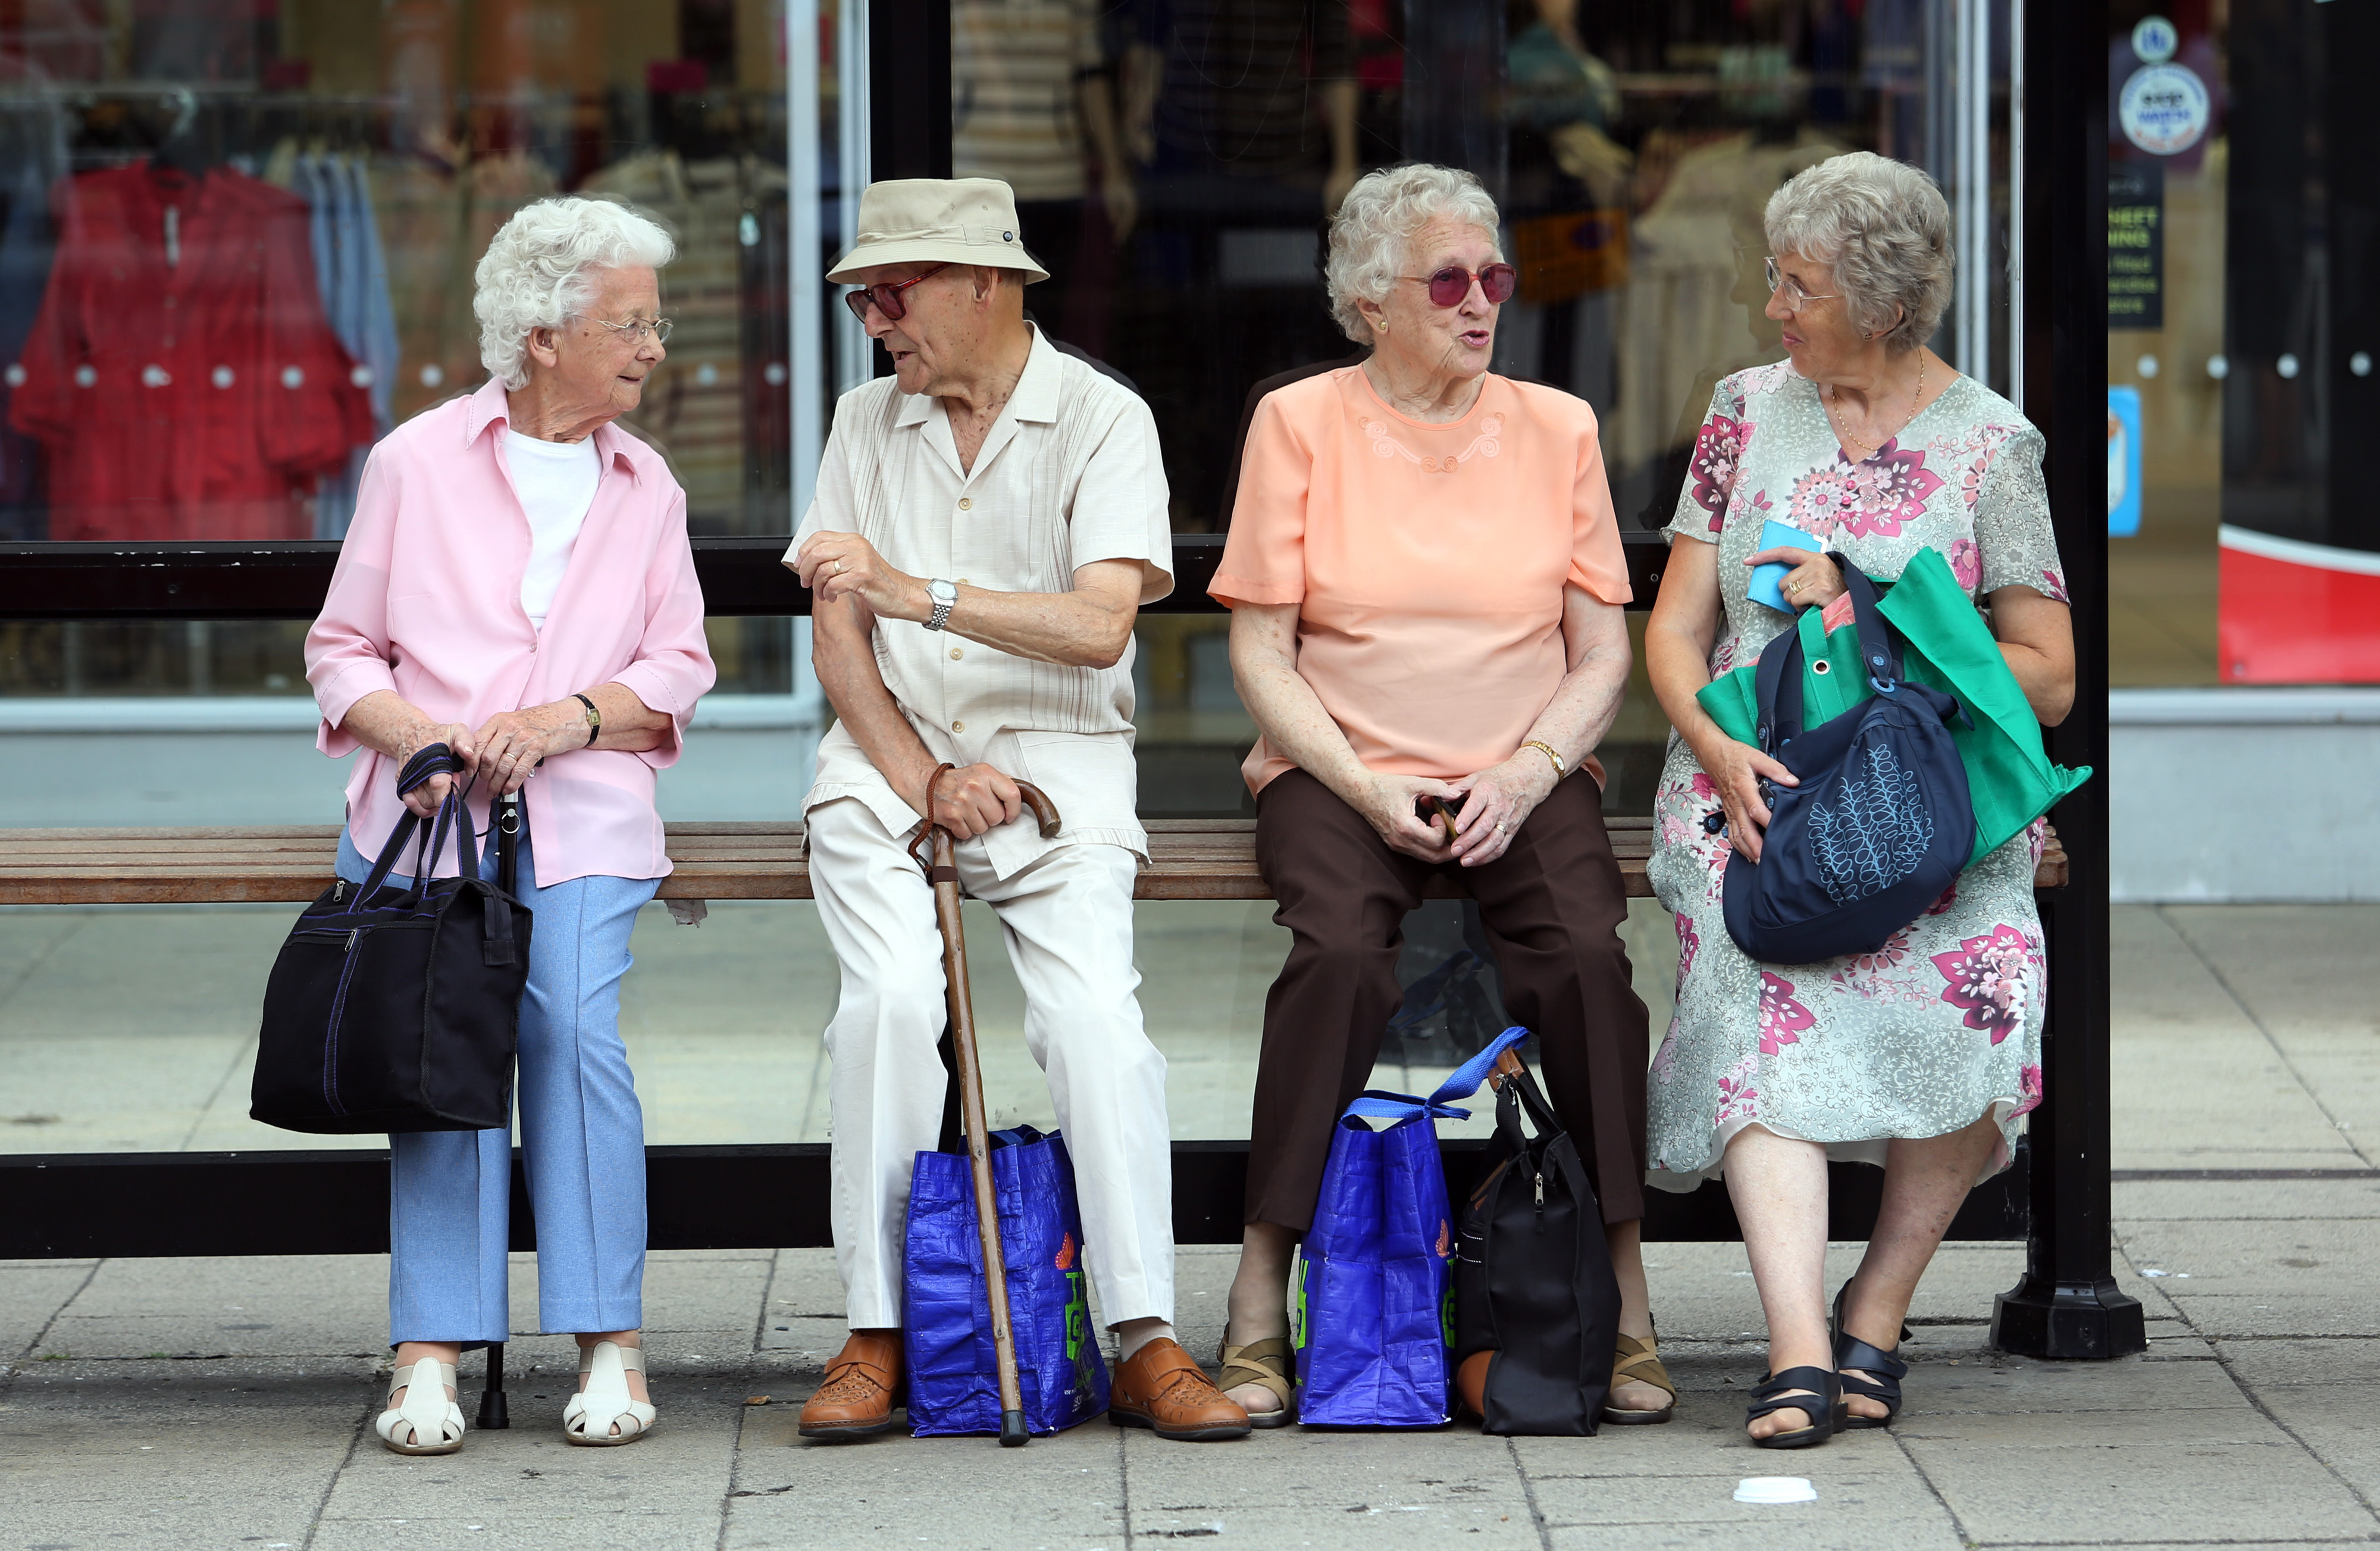 Elderly people sit with their shopping bags as they wait for transportation at a bus stop in Hastings, U.K., on Tuesday, July 23, 2013. (Chris Ratcliffe—Bloomberg/Getty Images)